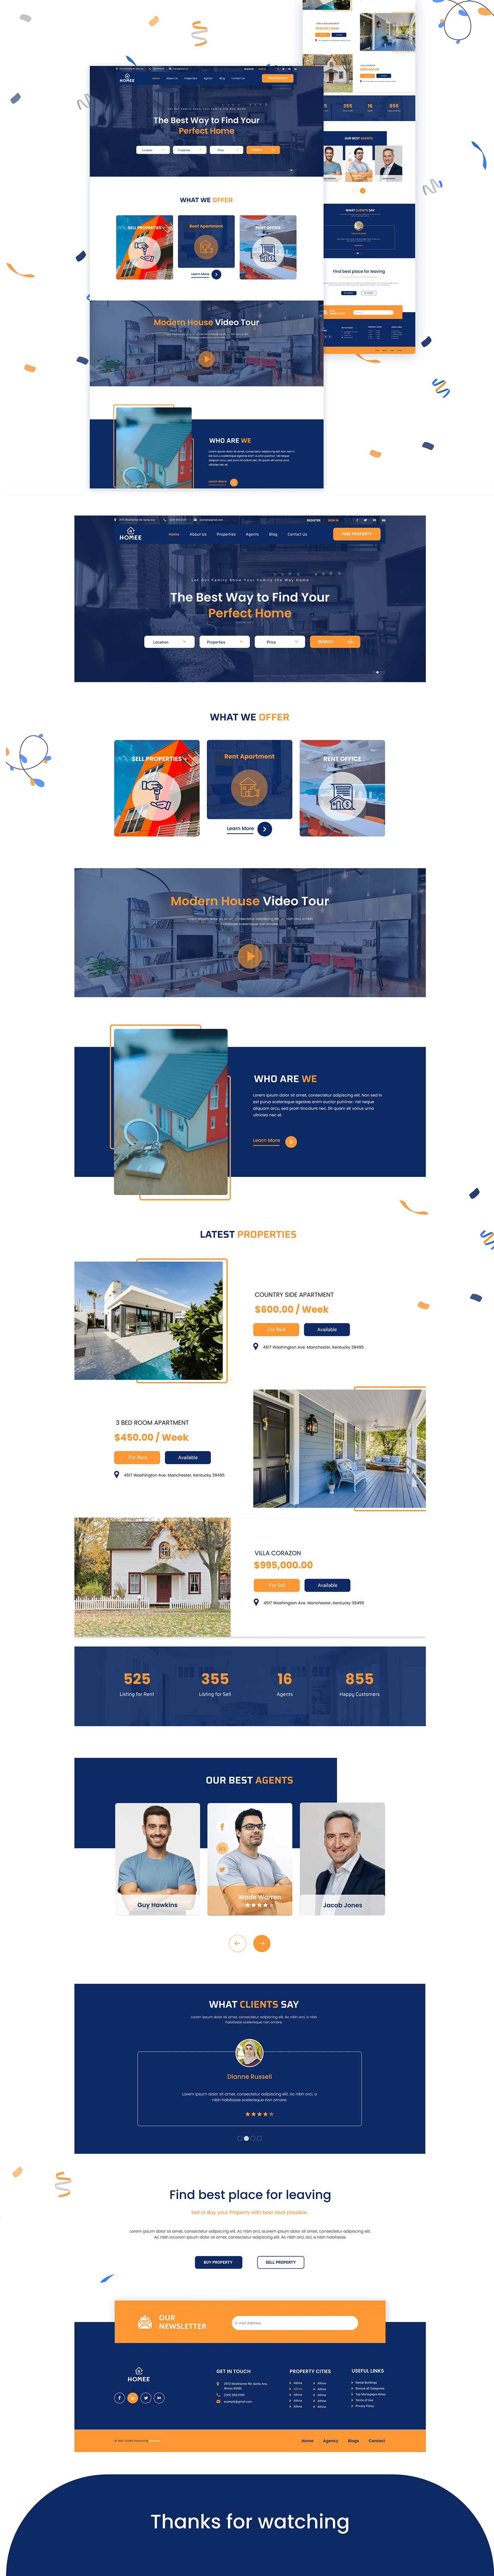 design ideas Easy Ui Full Project home page landingpage real estate Real Estate project realstate landing page ui design website ui